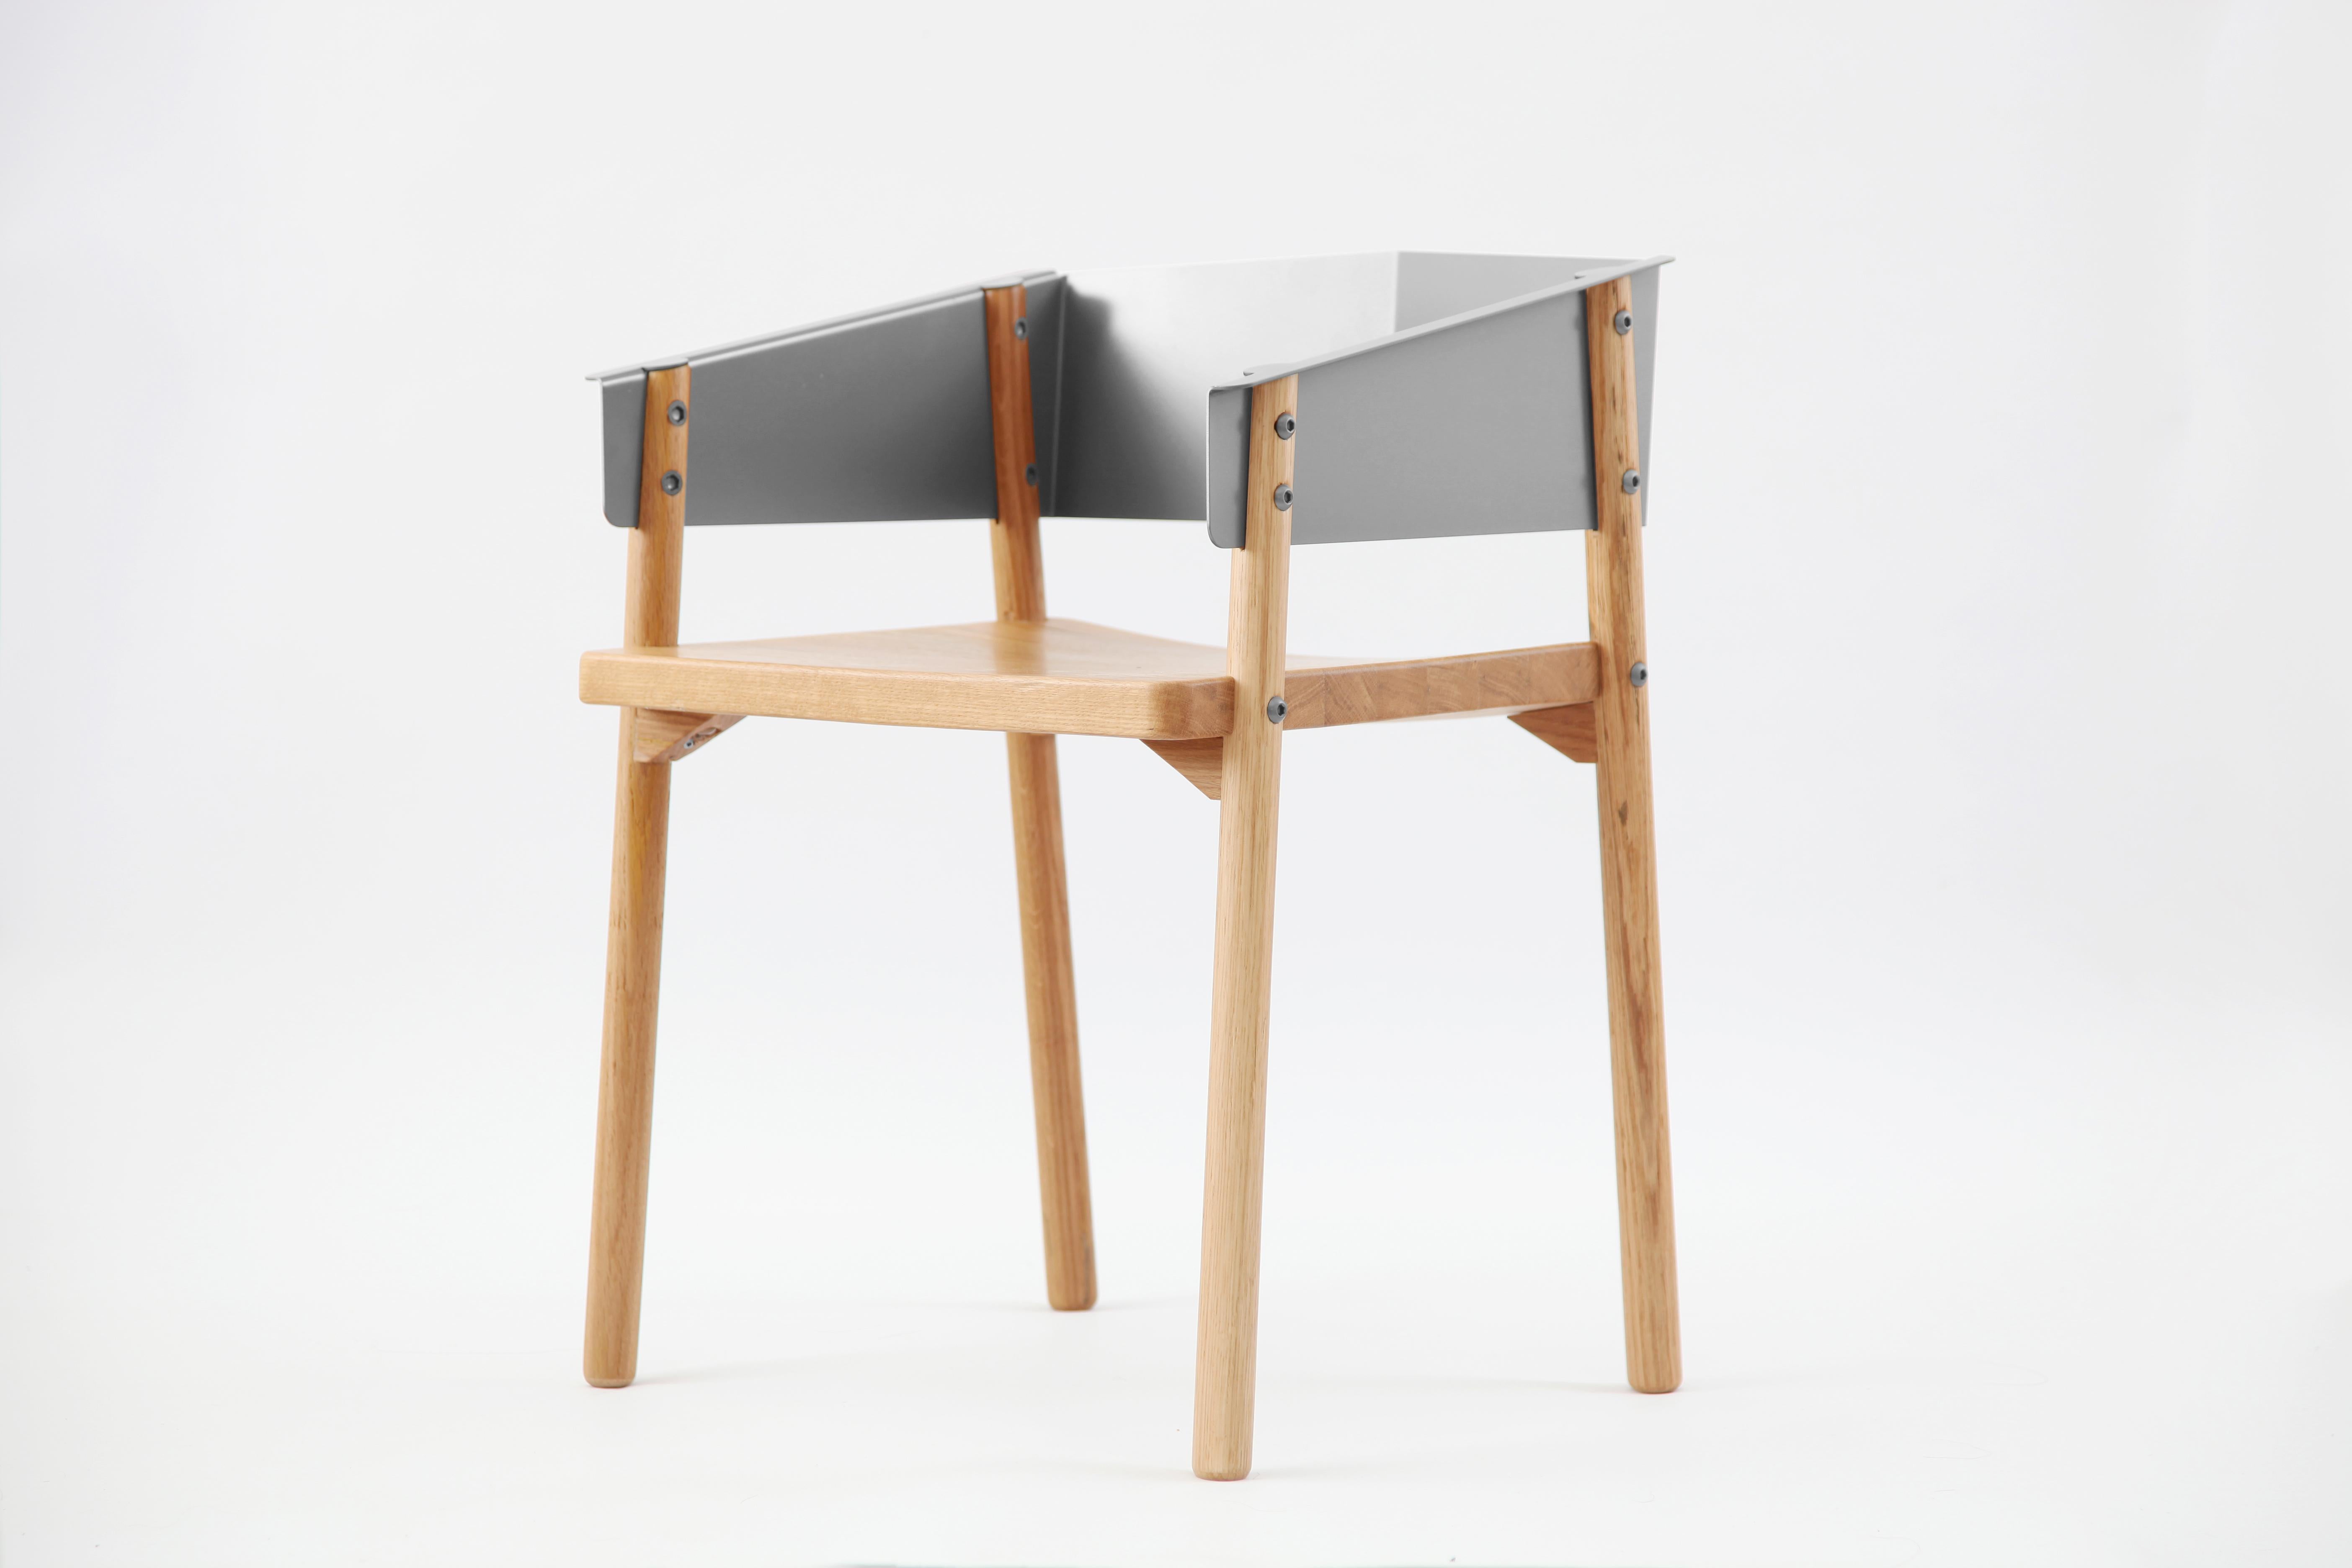 The aesthetics of Note Chair is to maximize and integrate forms with distinctive materials. The minimal white oak legs interlock with the folded-cutout-sheet-metal arms/seatback visually and structurally. The out-folded semicircles of the arm rests